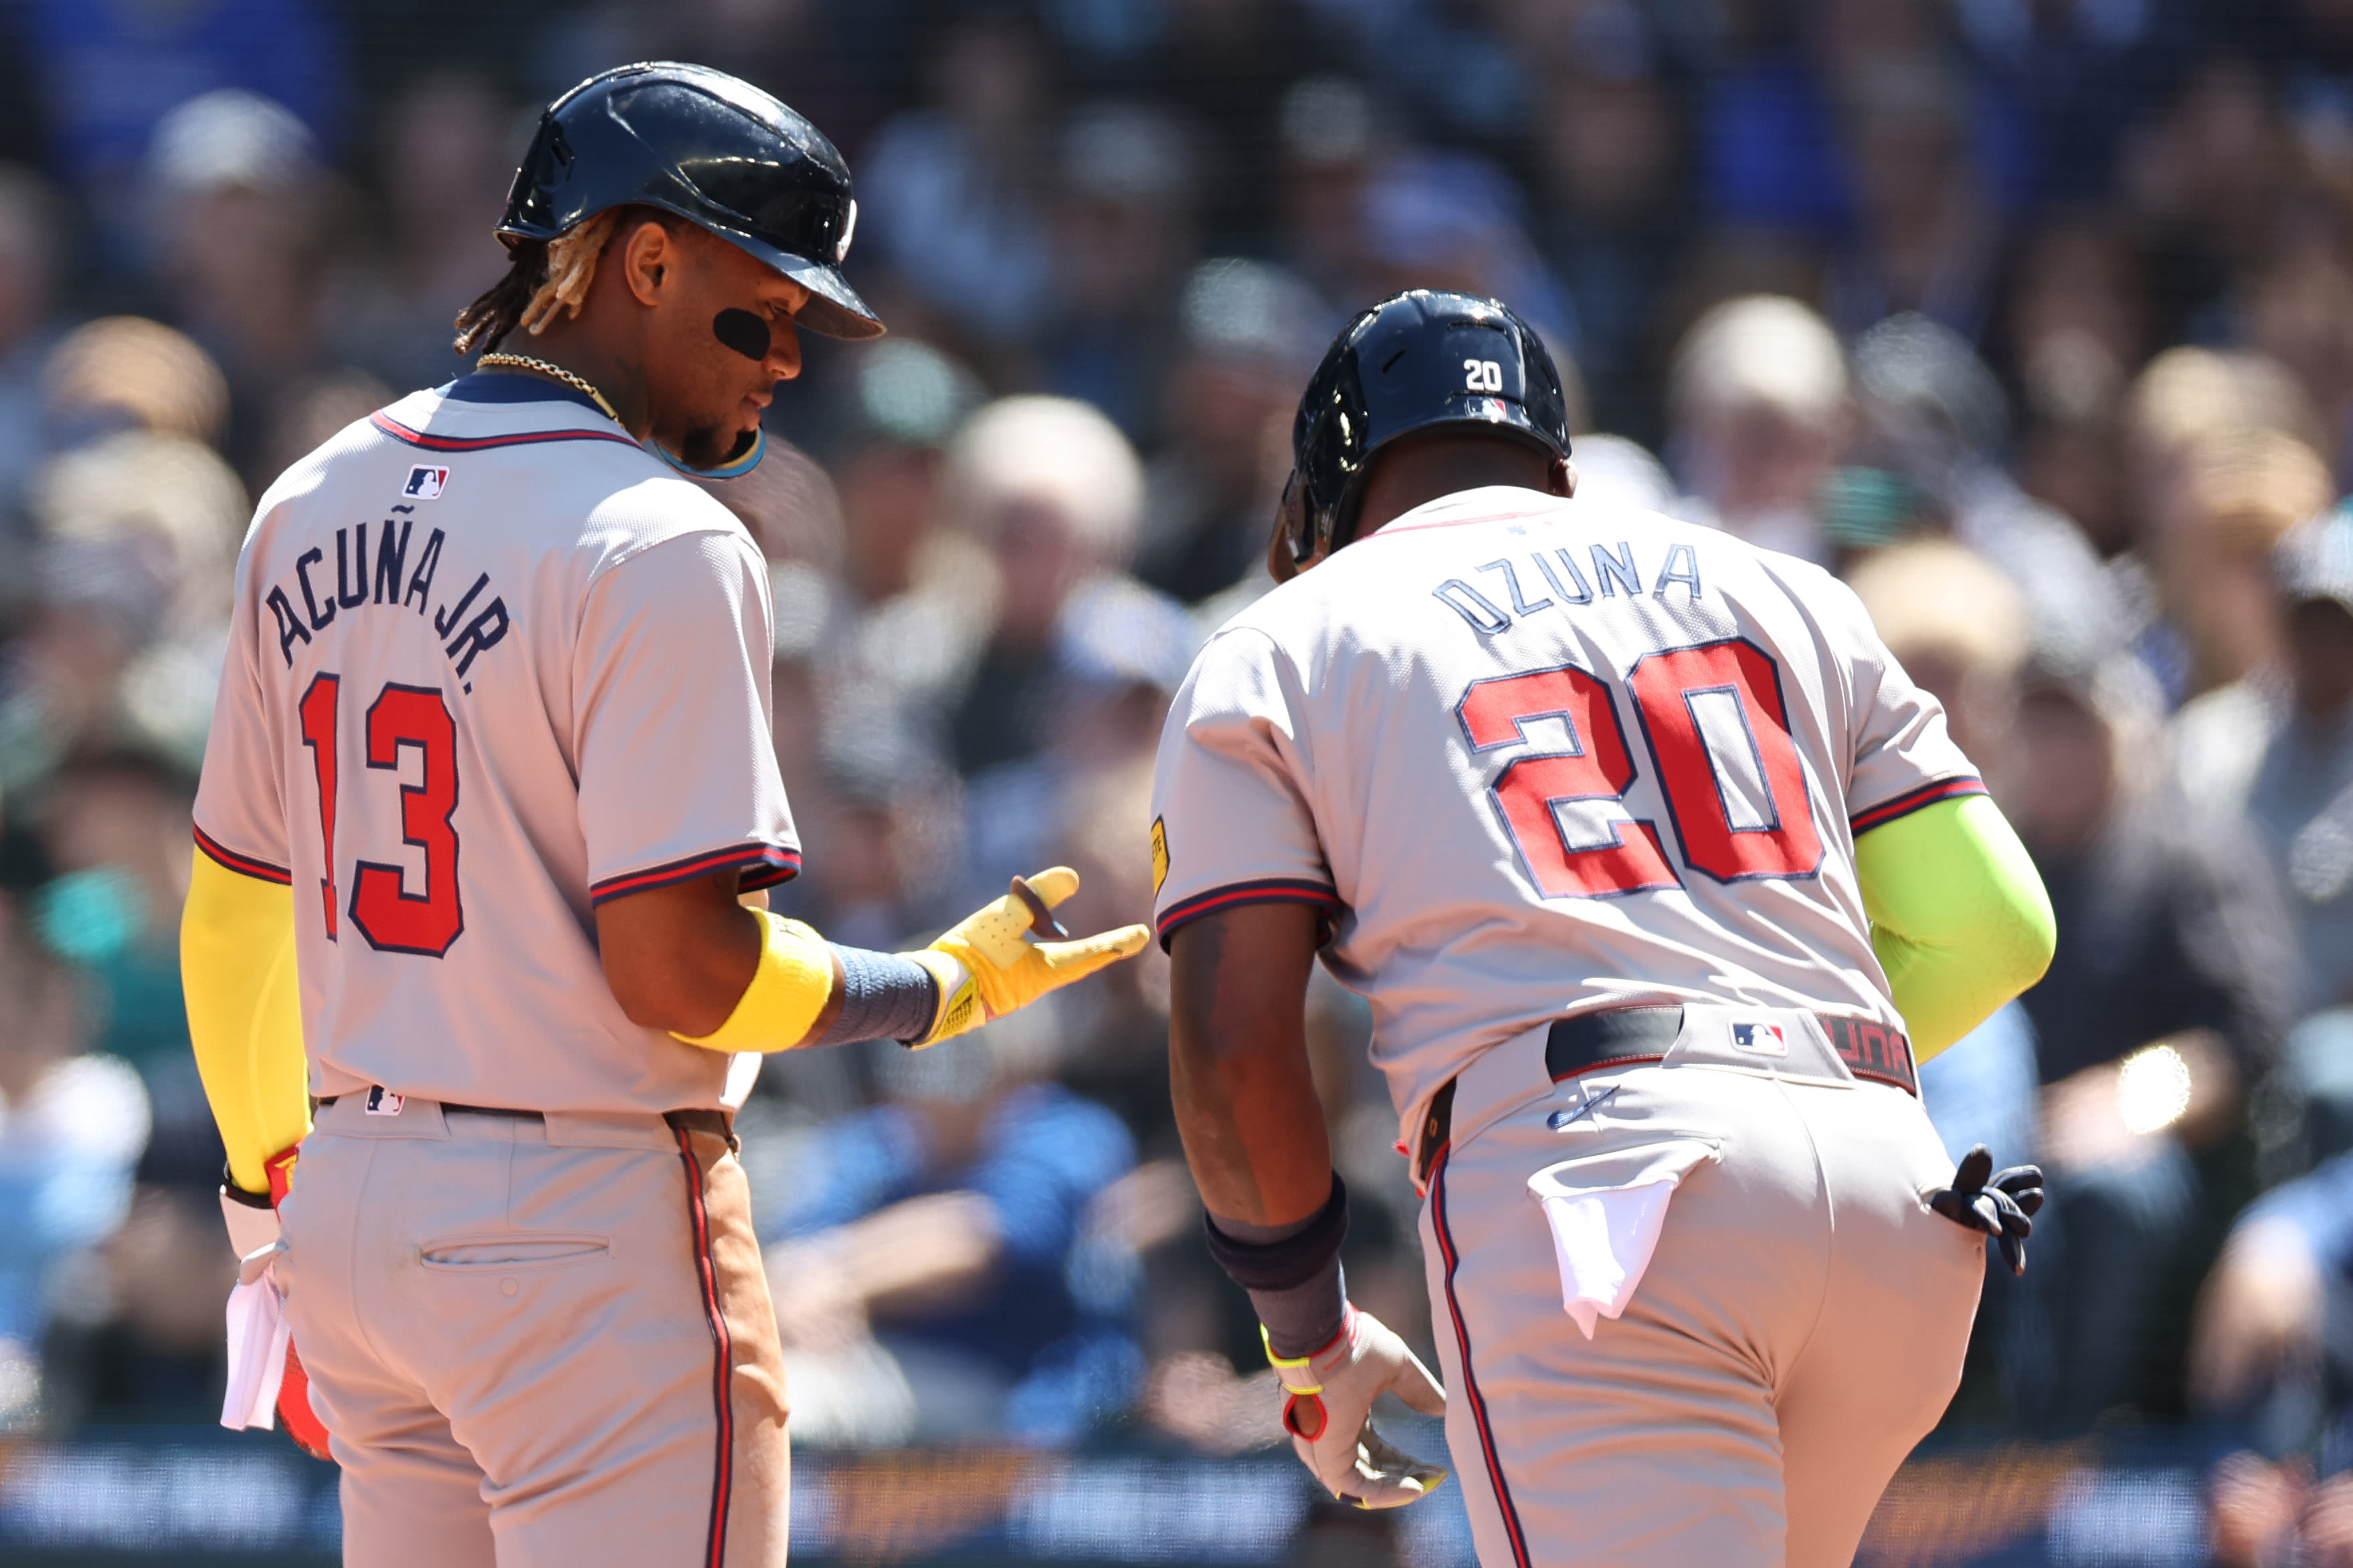 Fantasy Baseball Rankings: Updated rest-of-season outfield values broken down by tiers